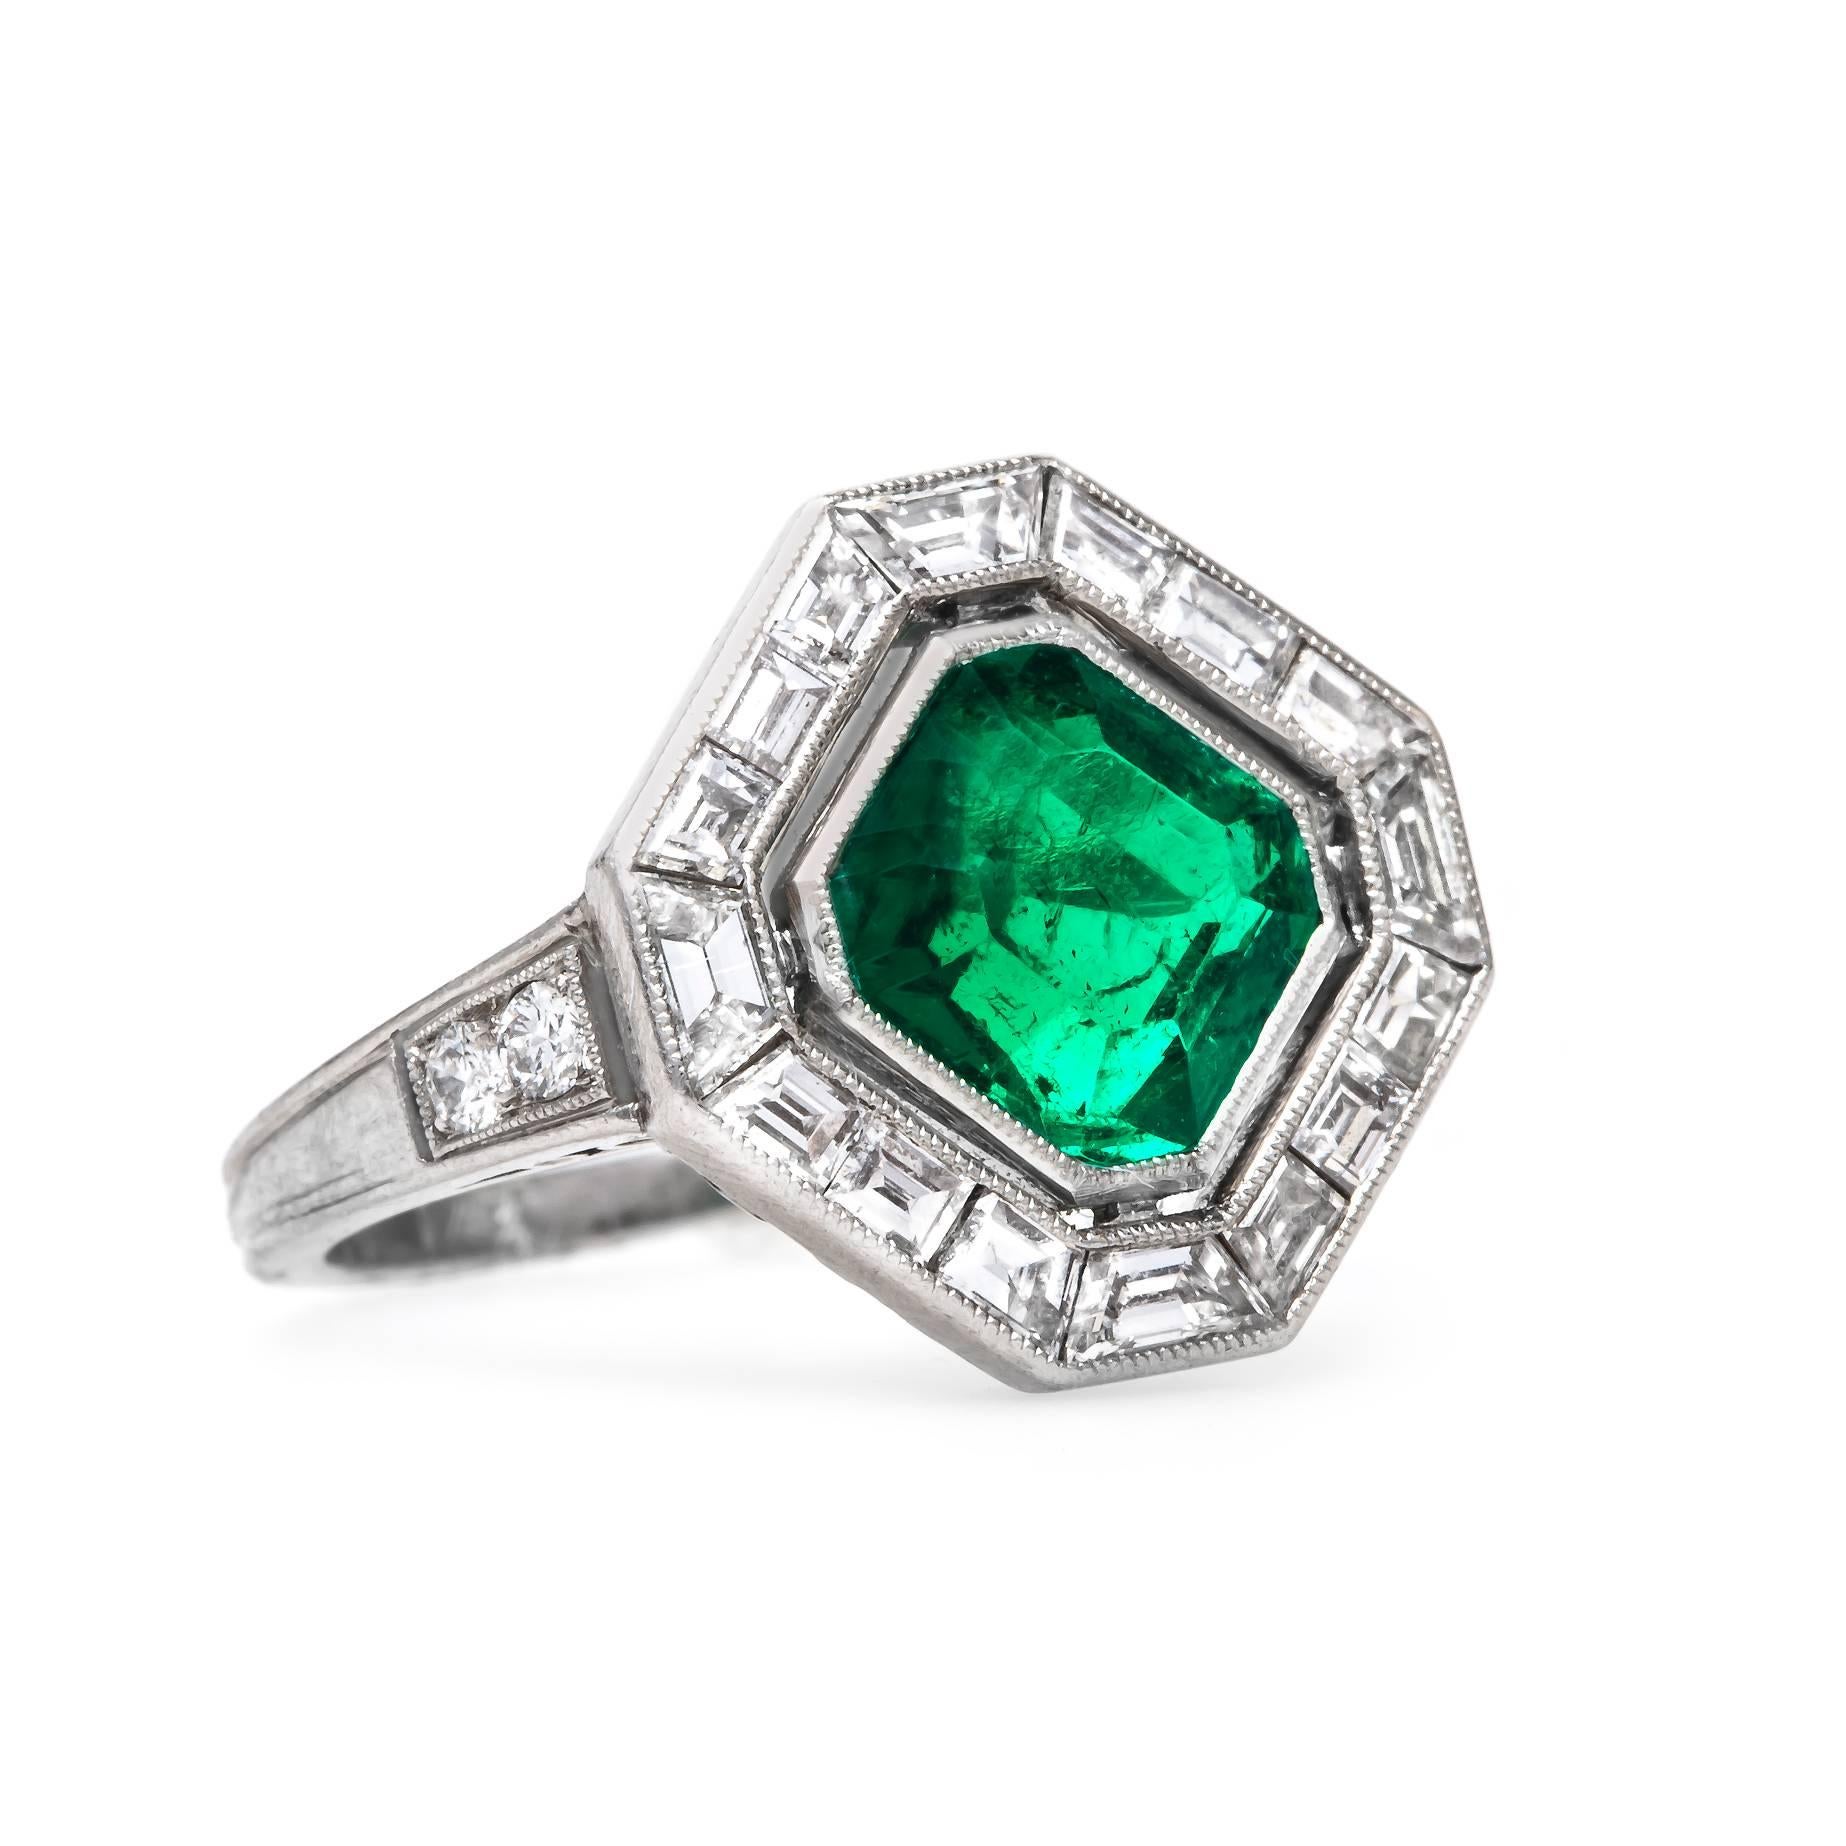 Penngrove is an unbelievable authentic Art Deco (circa 1923) platinum ring centering a Square Step Cut natural emerald gauged at 7.25mm x 7.25mm x 4.40mm totaling approximately 1.70ct in weight and accompanied by a Guild Laboratories Certificate